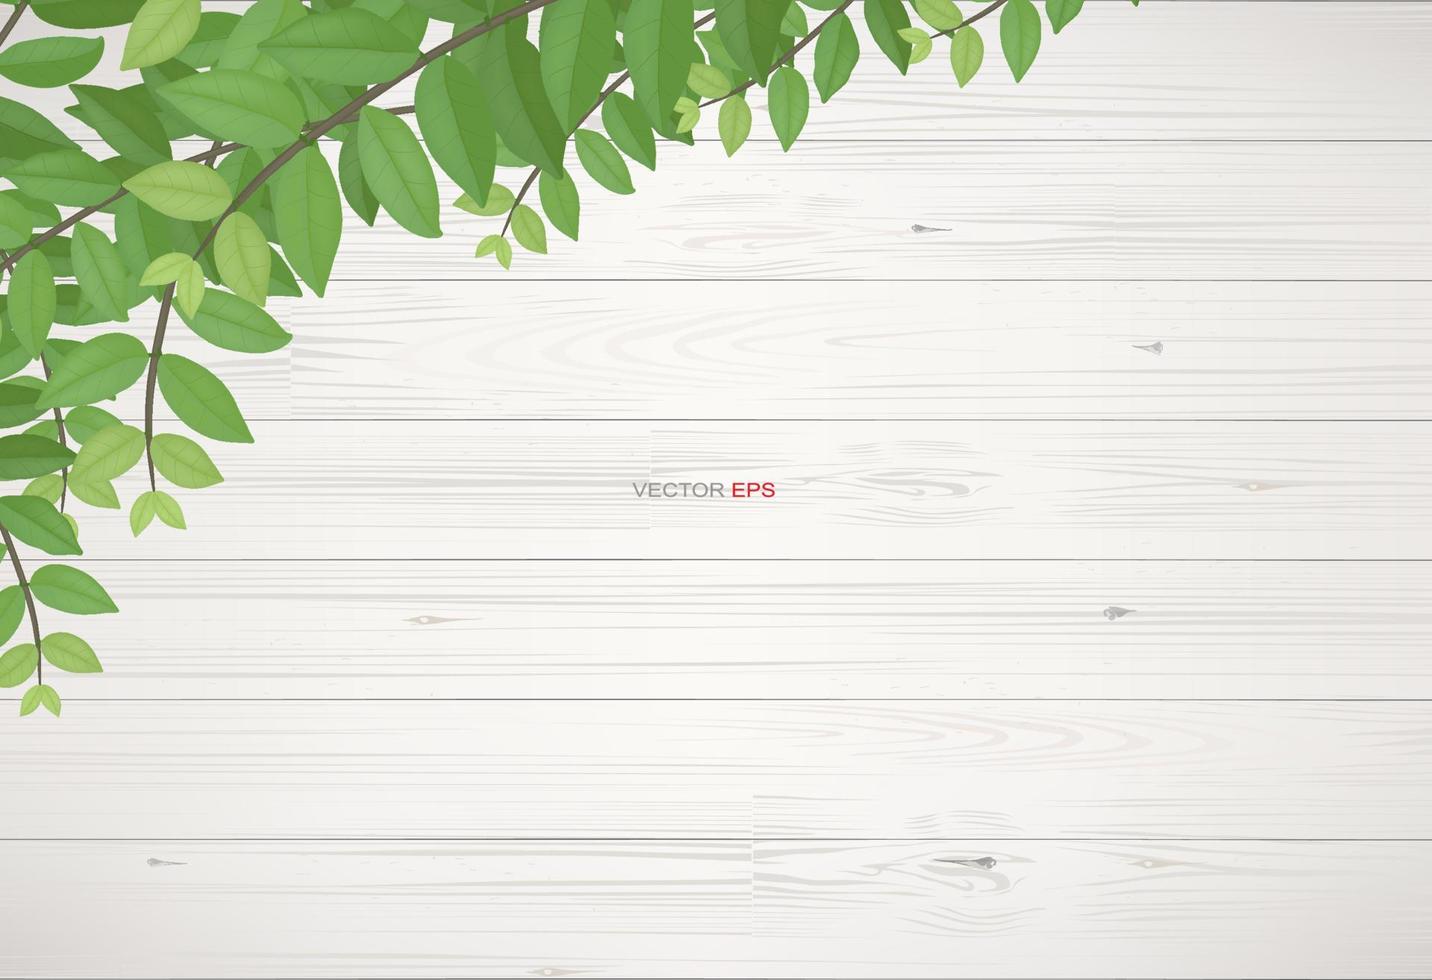 Wood texture background with green leaves.  Vector illustration.